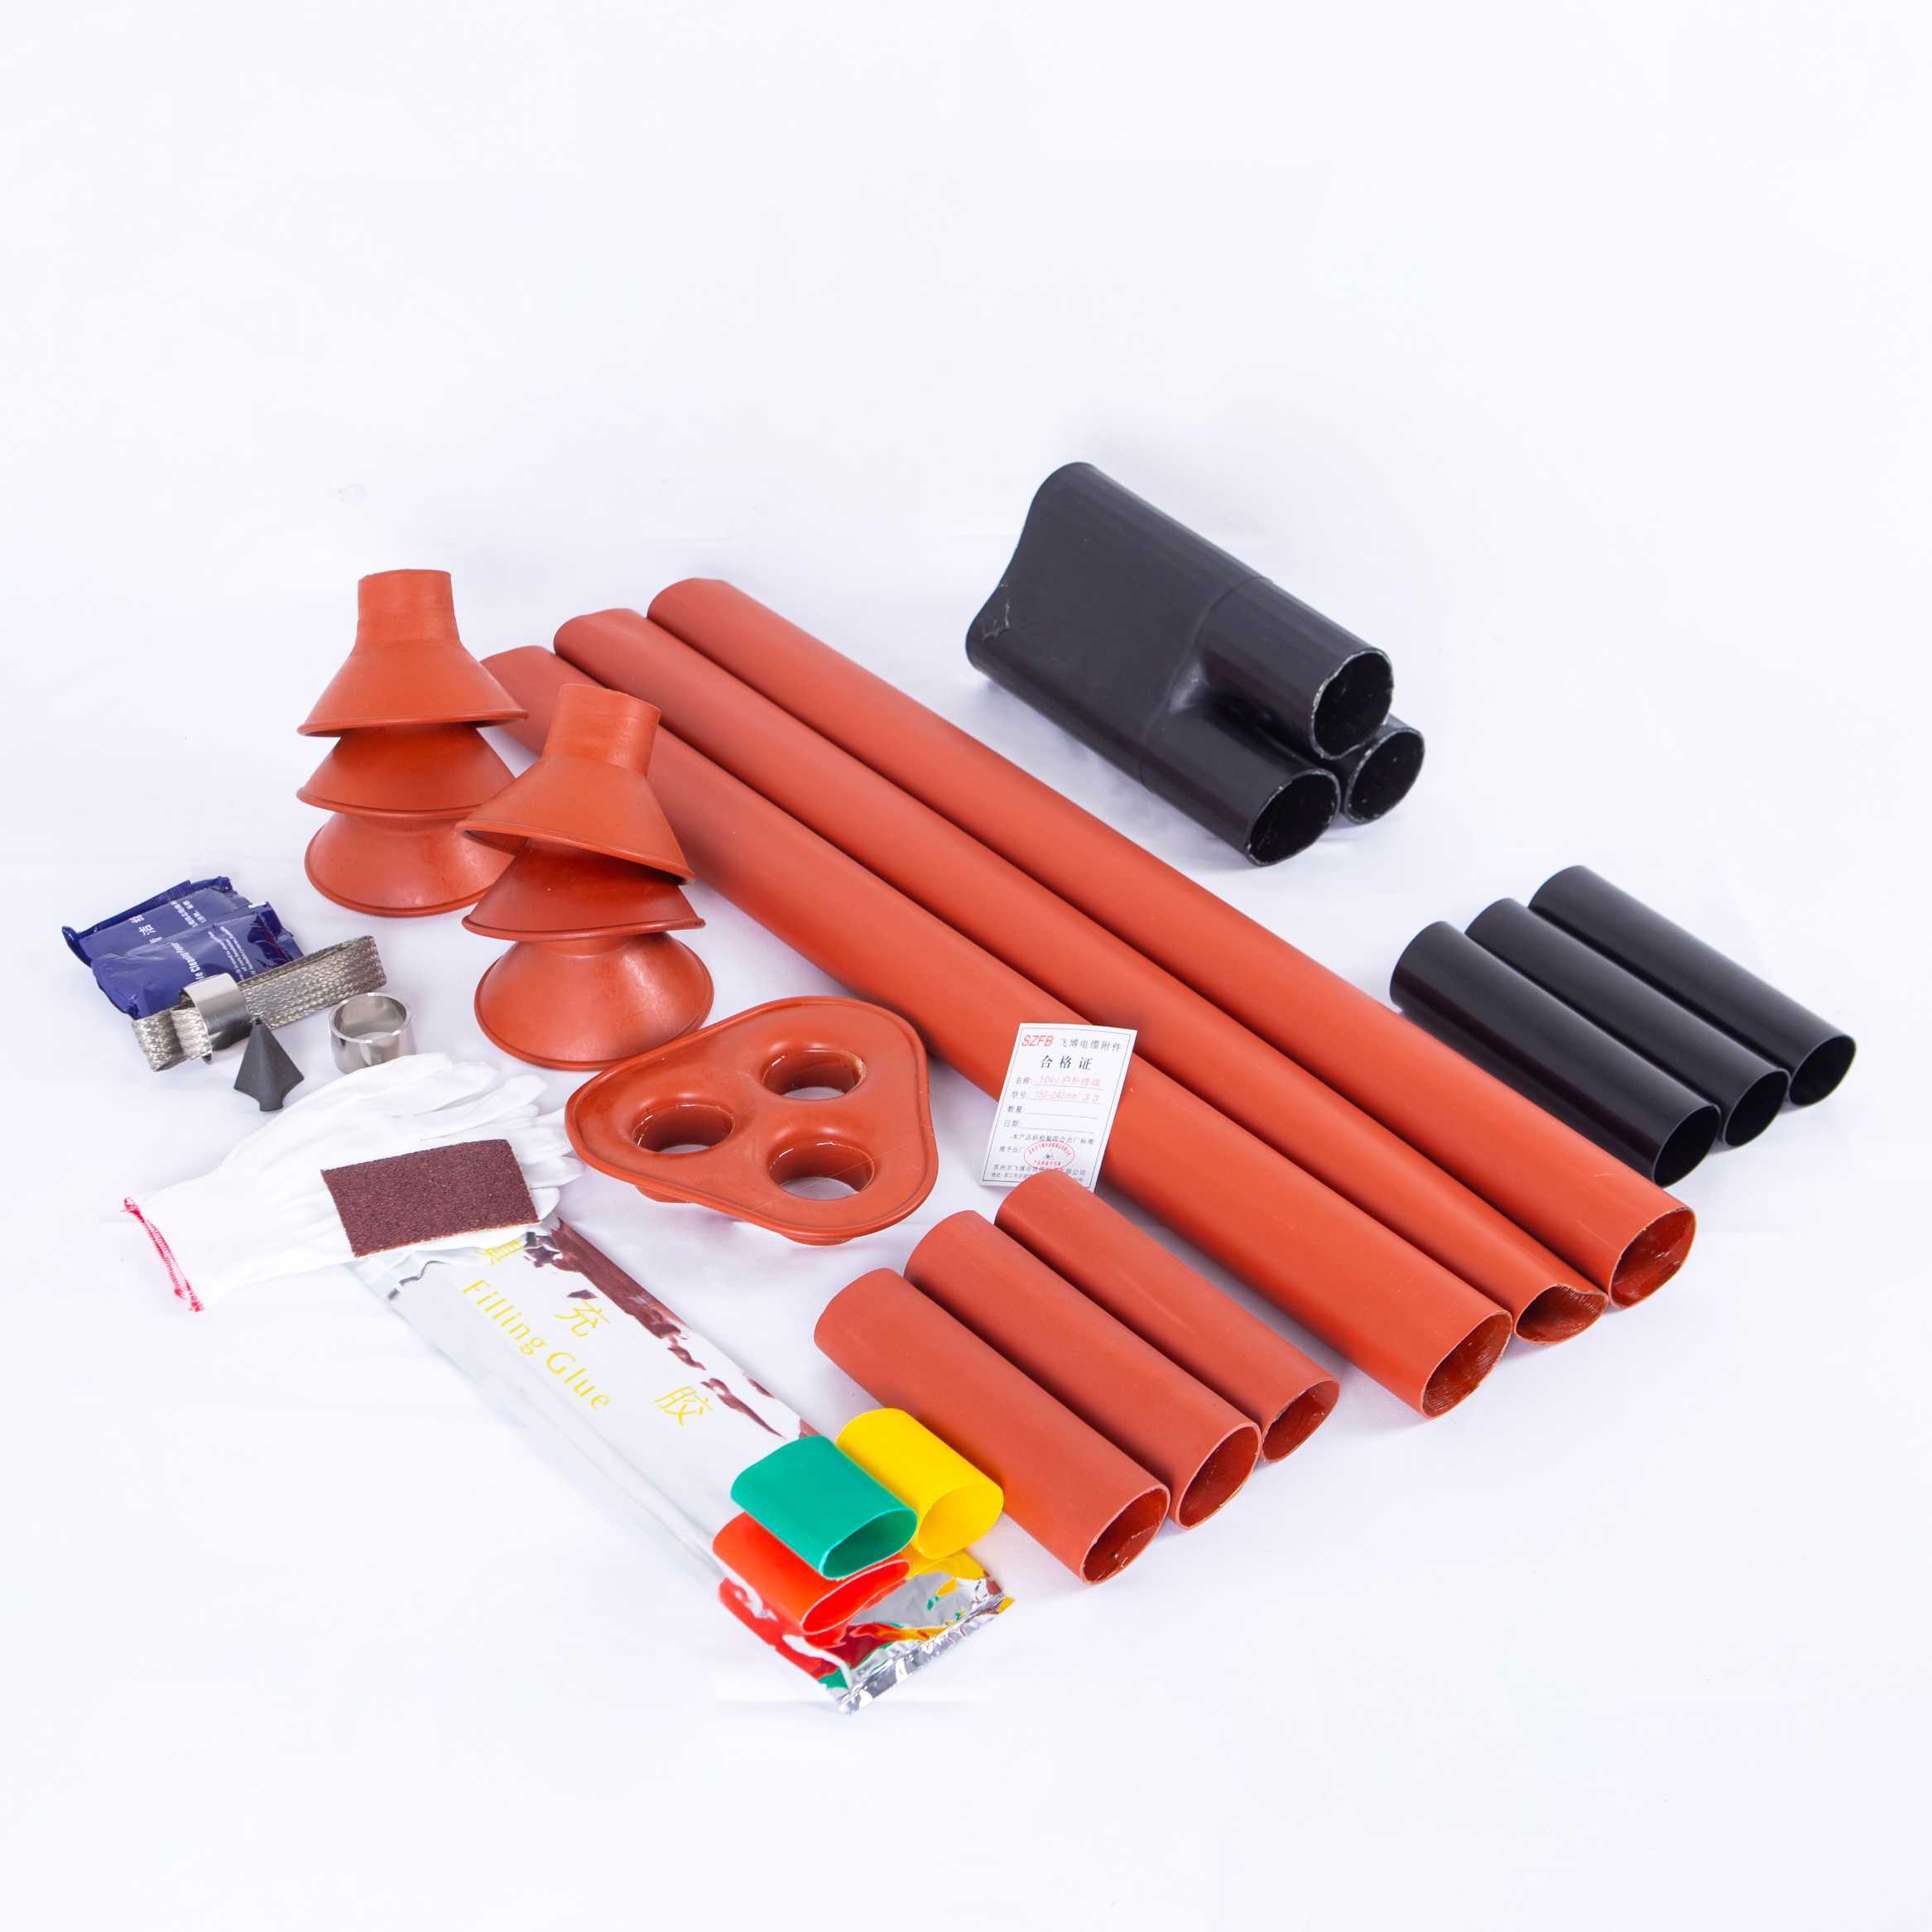 Electrical Wire Cable Heat Shrink Wrap Assortment Electric Insulation Heat Shrink Tube Kit Accessories Band Joint Material